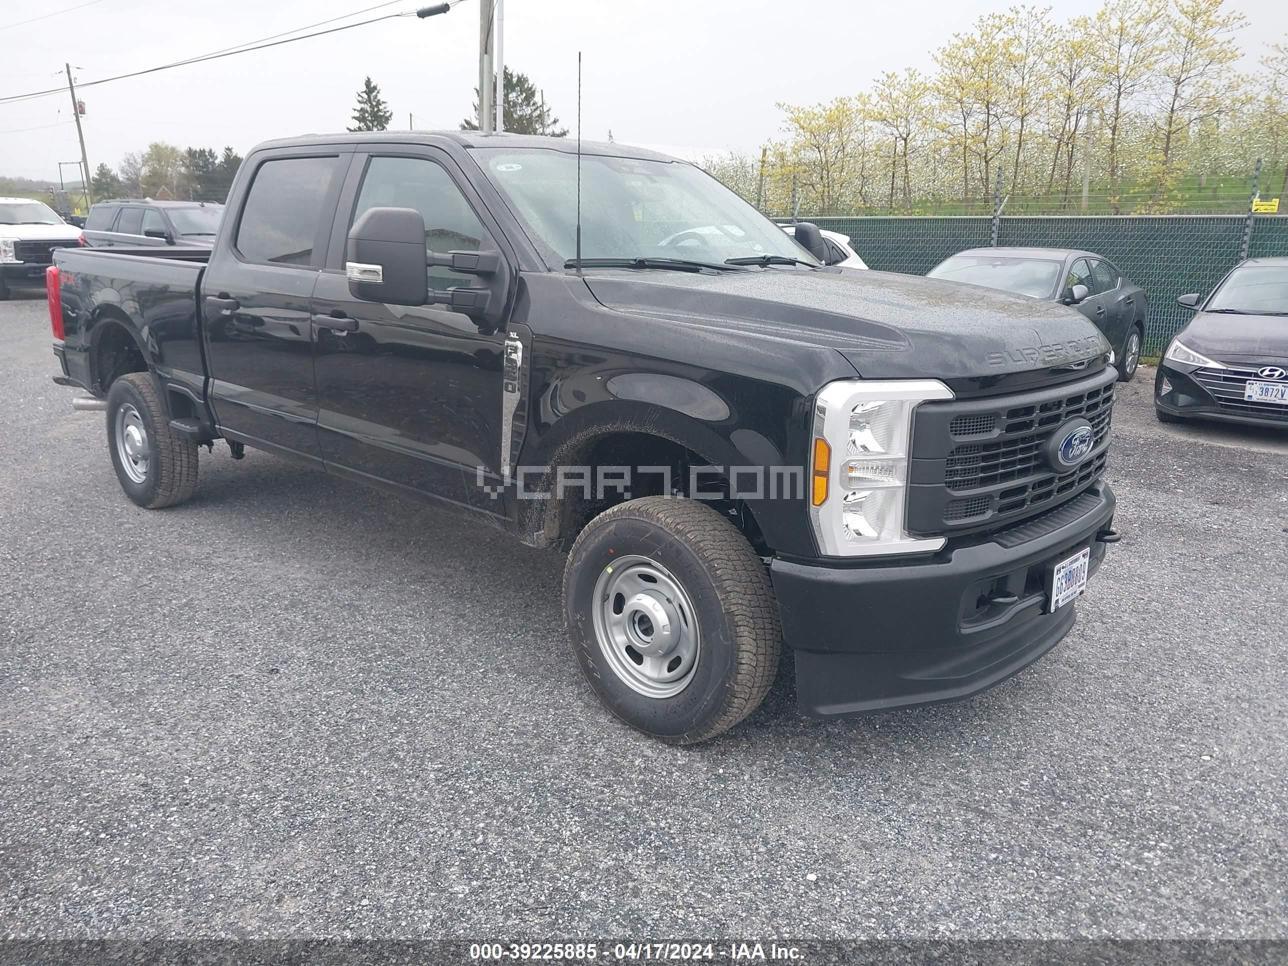 VIN: 1FT8W3BA3RED53616 - ford f350